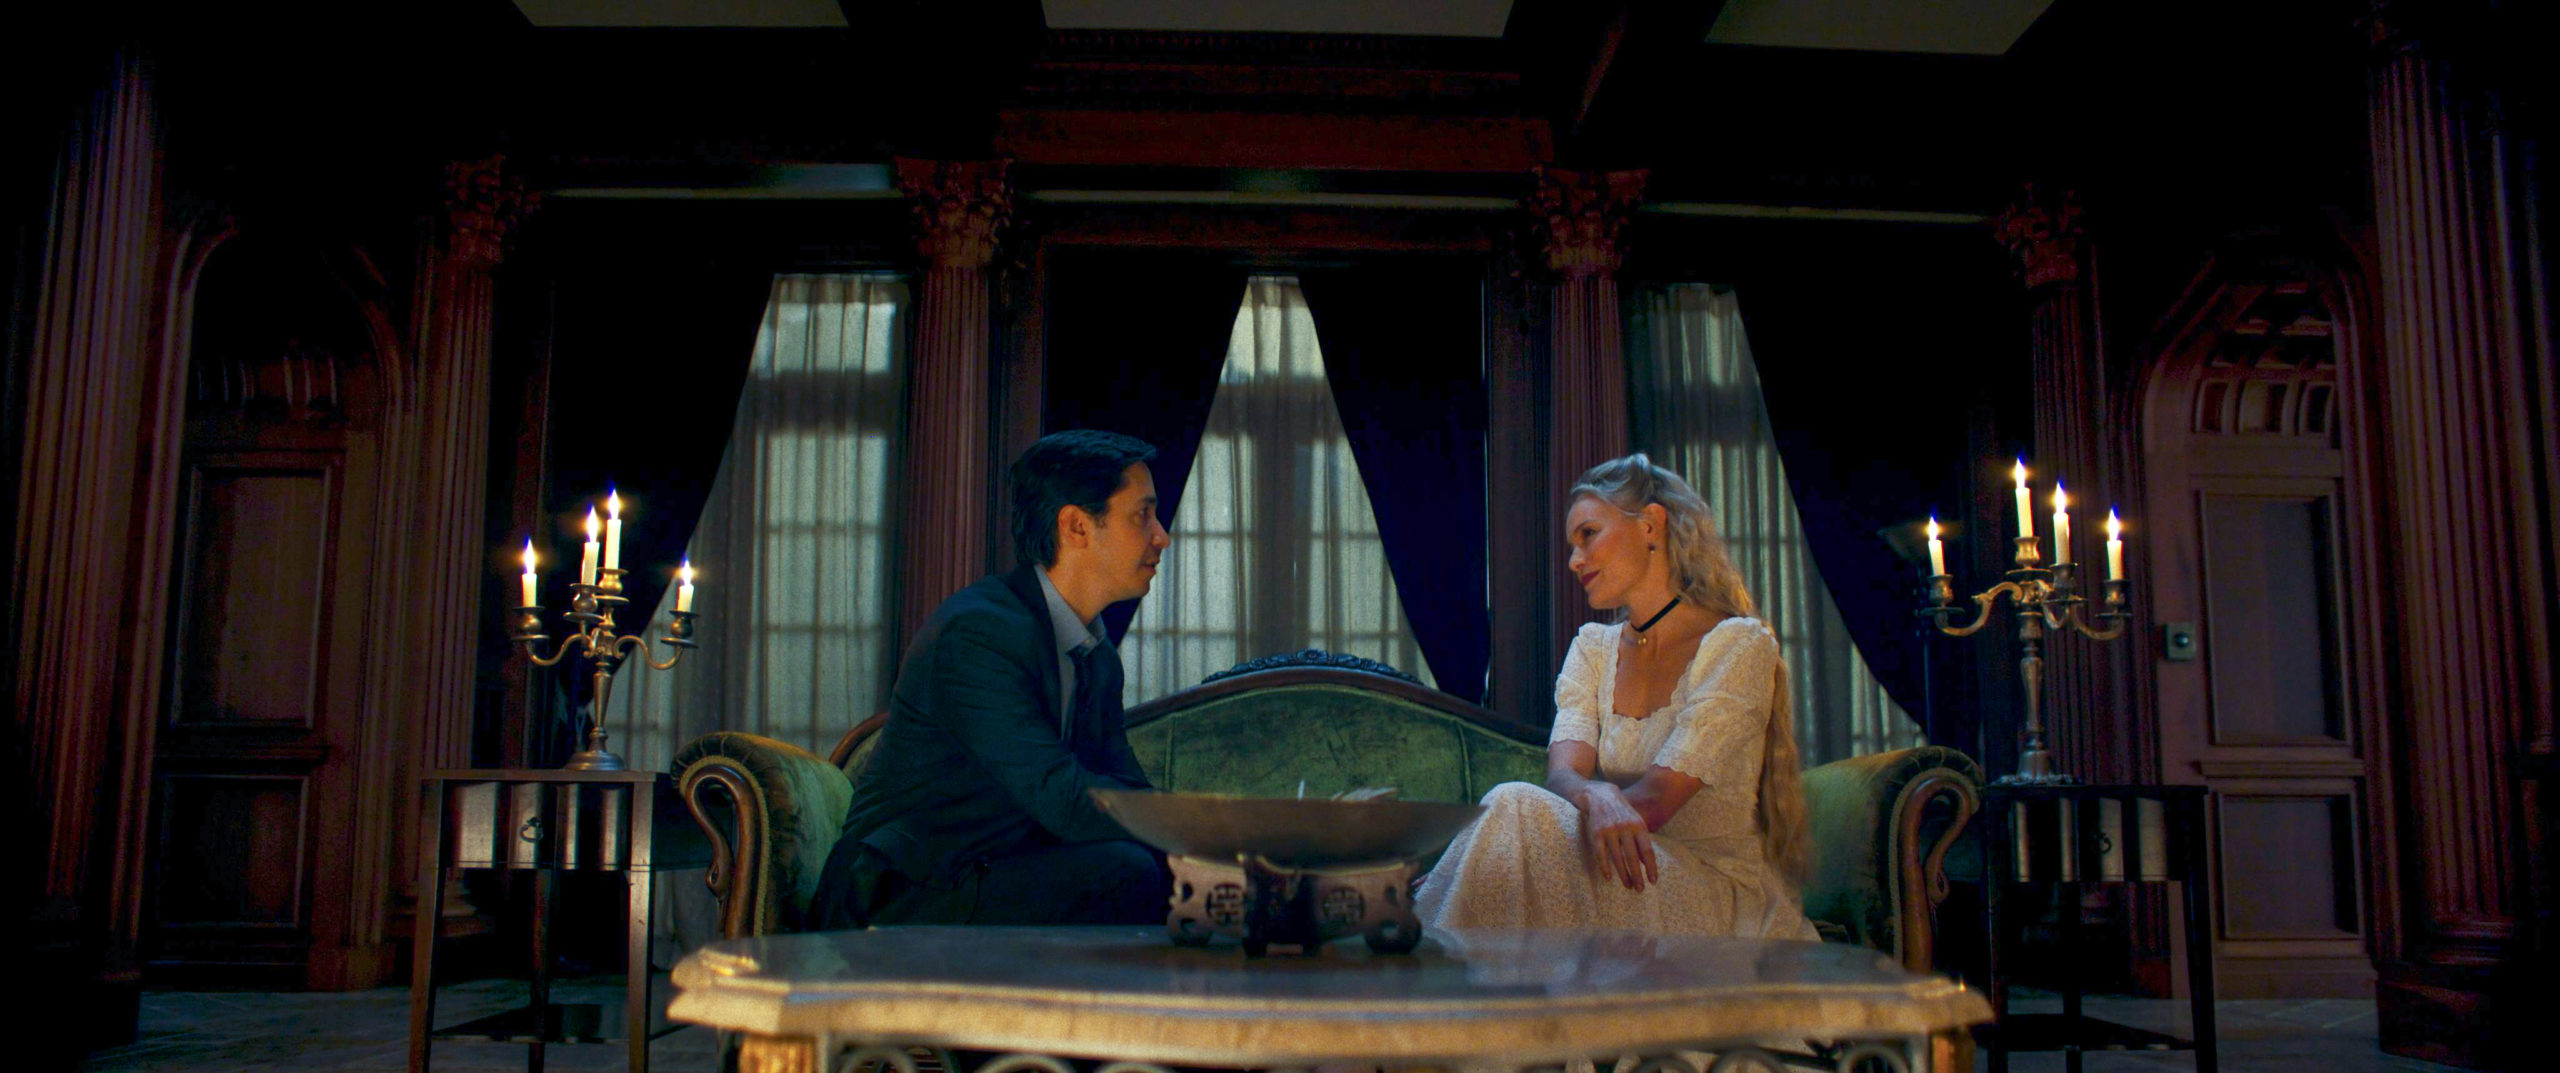 House of Darkness Trailer Has Kate Bosworth Luring Justin Long into a Trap of Seduction